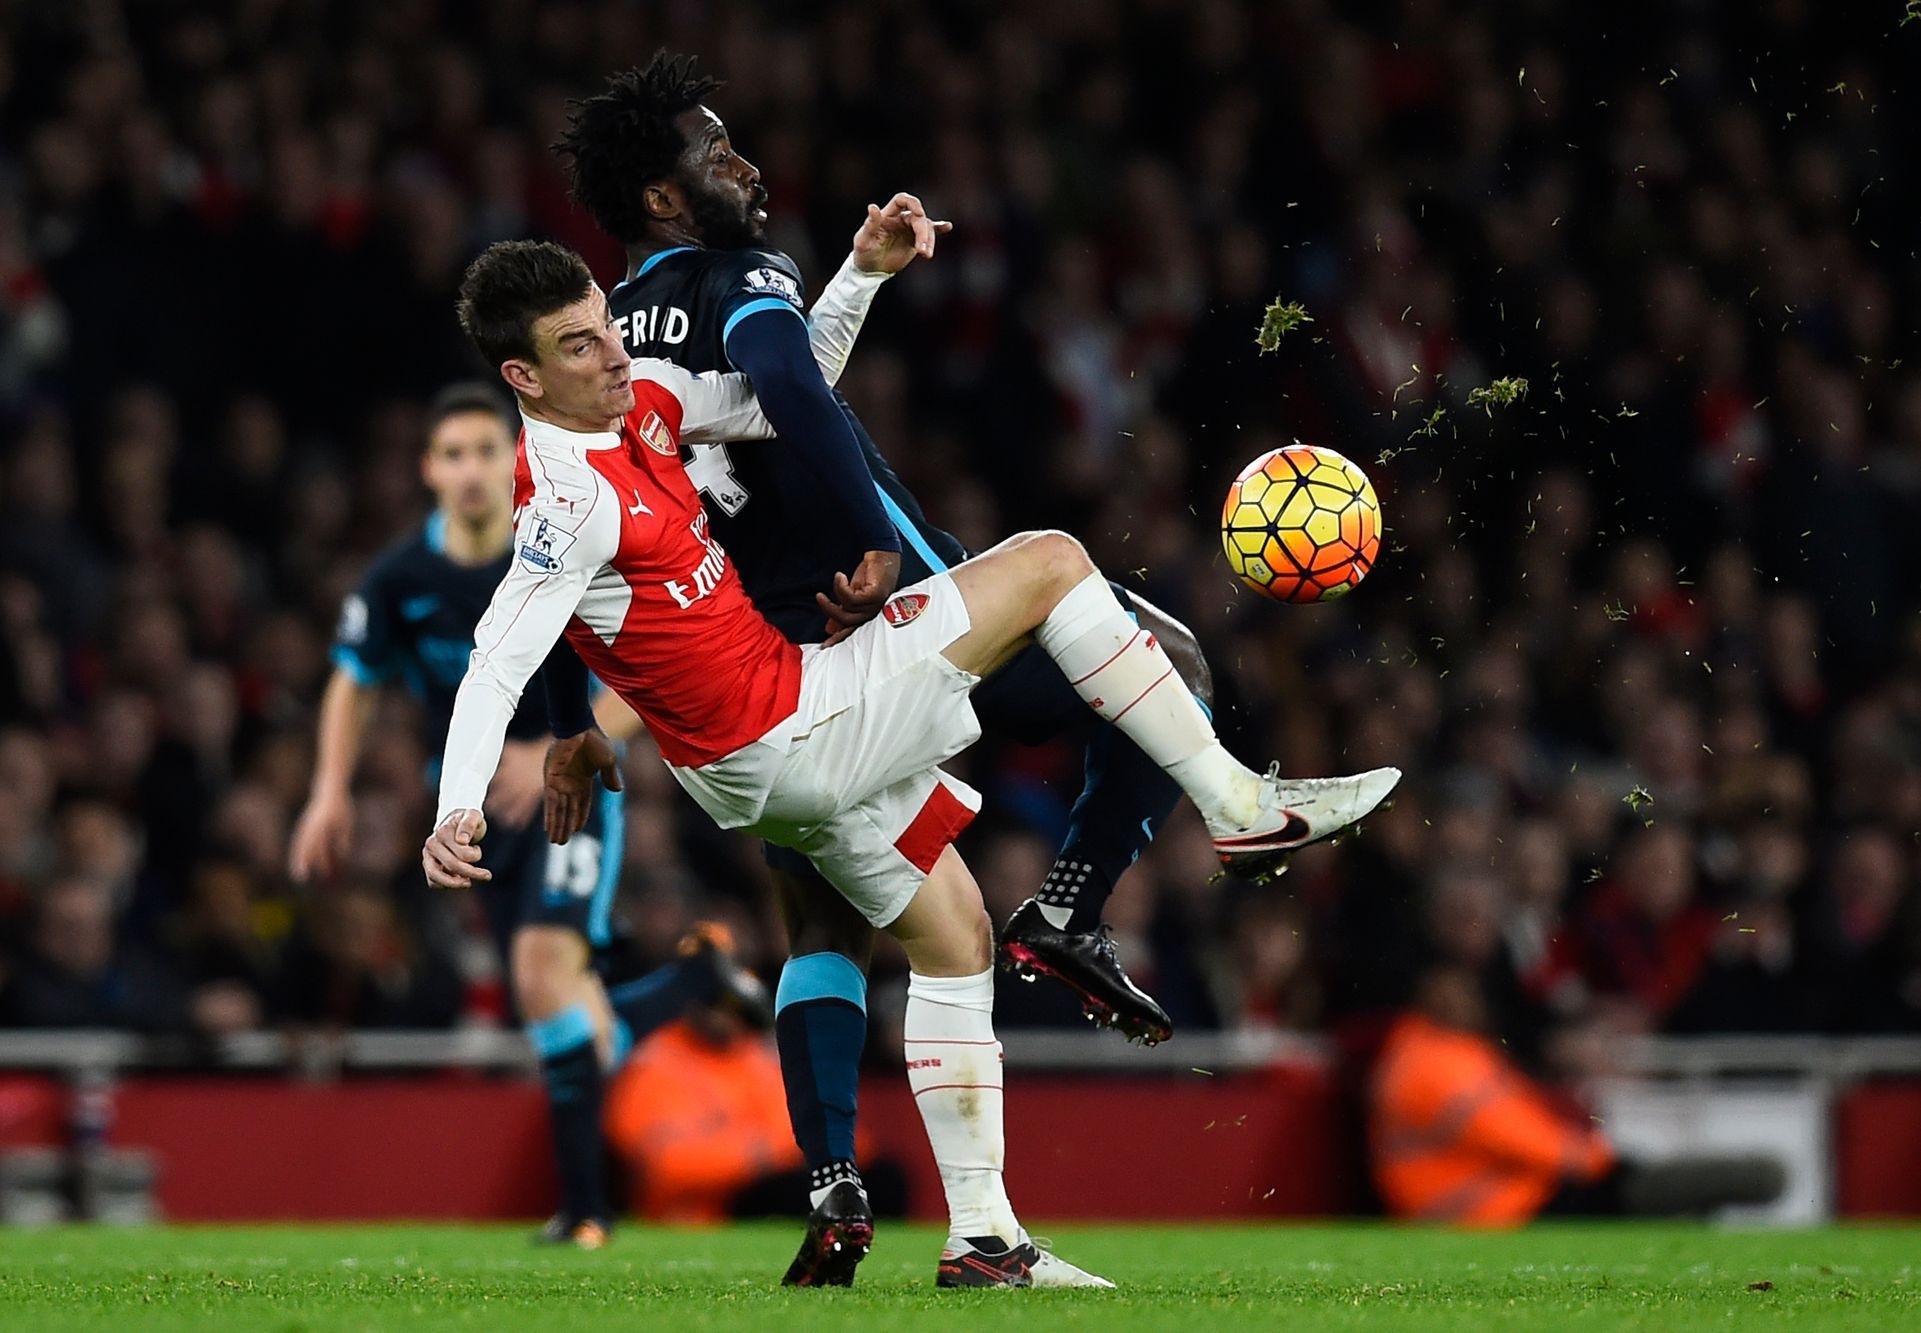 Manchester City's Wilfried Bony in action with Arsenal's Laurent Koscielny